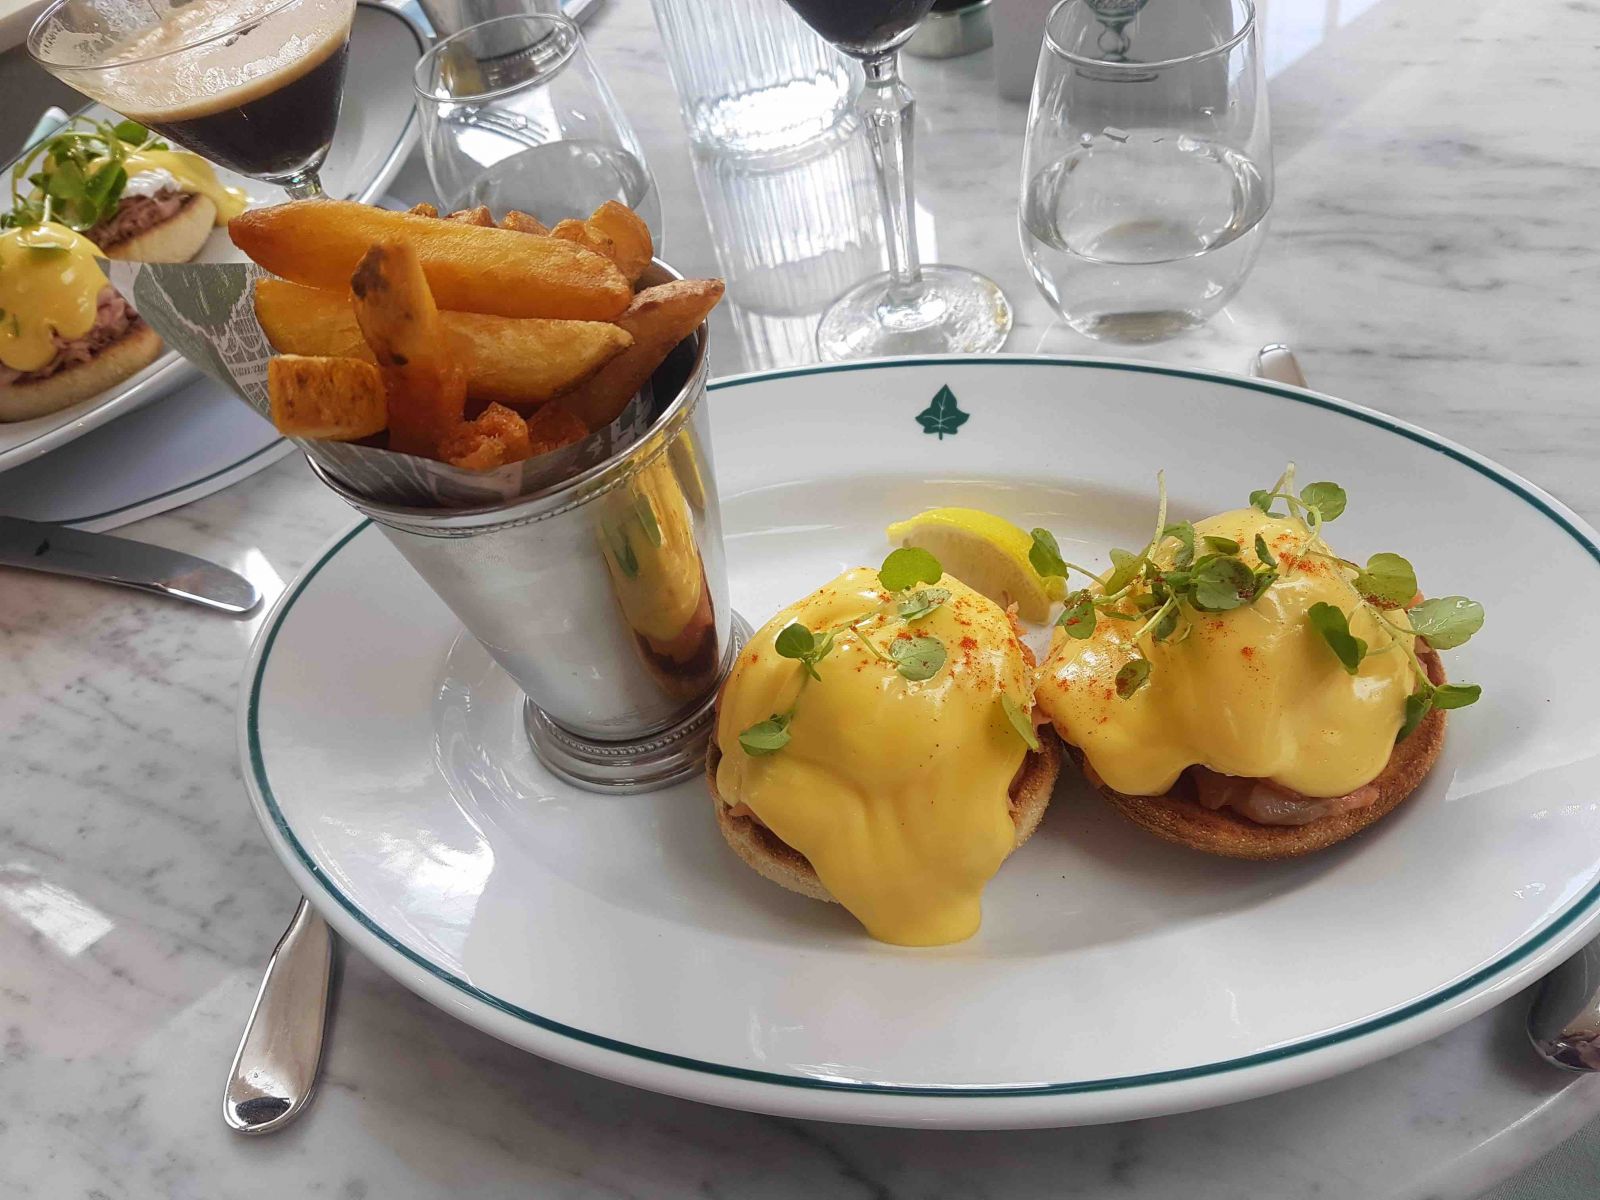 Tom's outstanding brunch at The Ivy Clifton Brasserie in Bristol